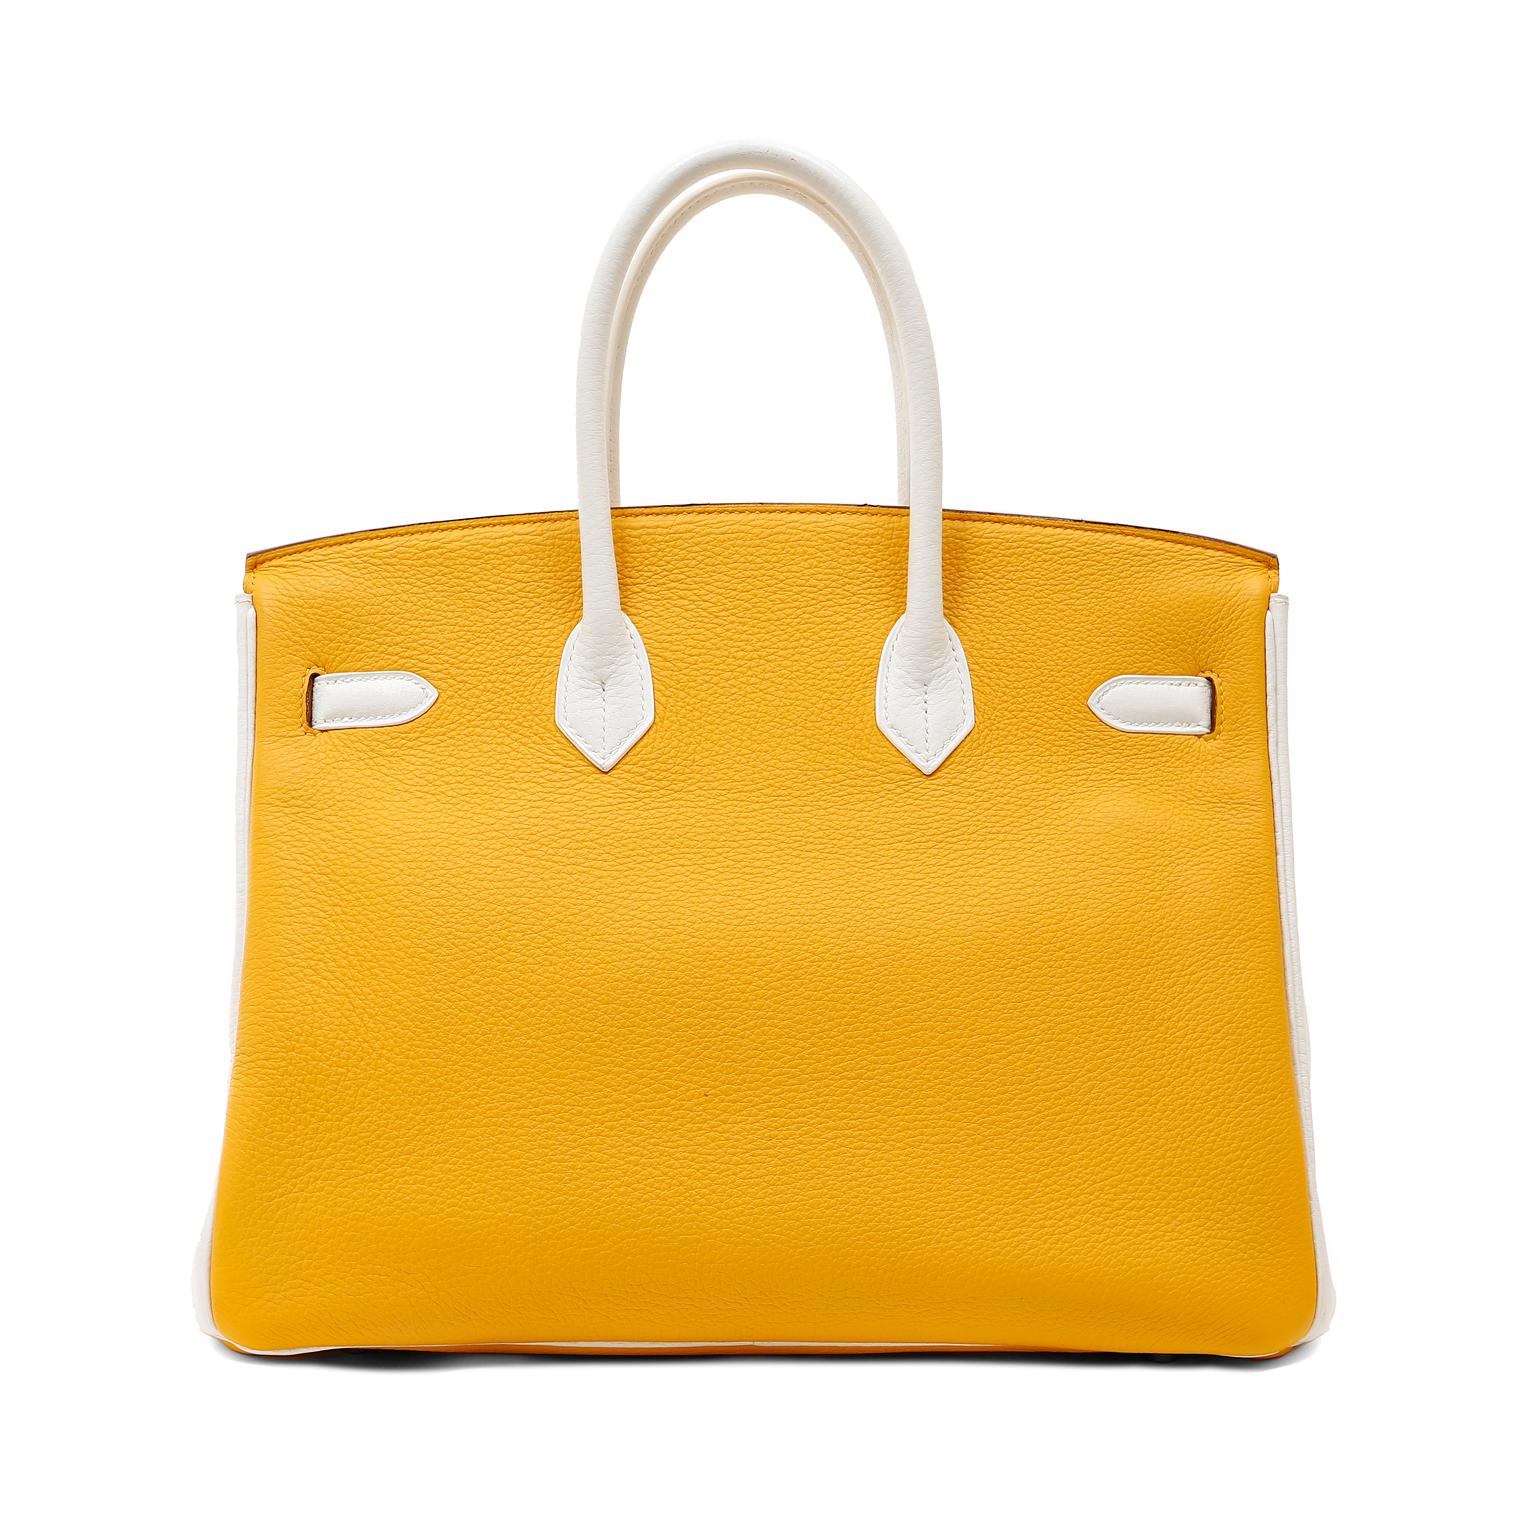 This authentic Hermès Yellow and White Clemence 35 cm Birkin is in excellent condition.  Hermès bags are handstitched and usually require extensive wait lists.   This uniquely bicolored Birkin is very collectible. 
Sunny yellow Clemence leather is